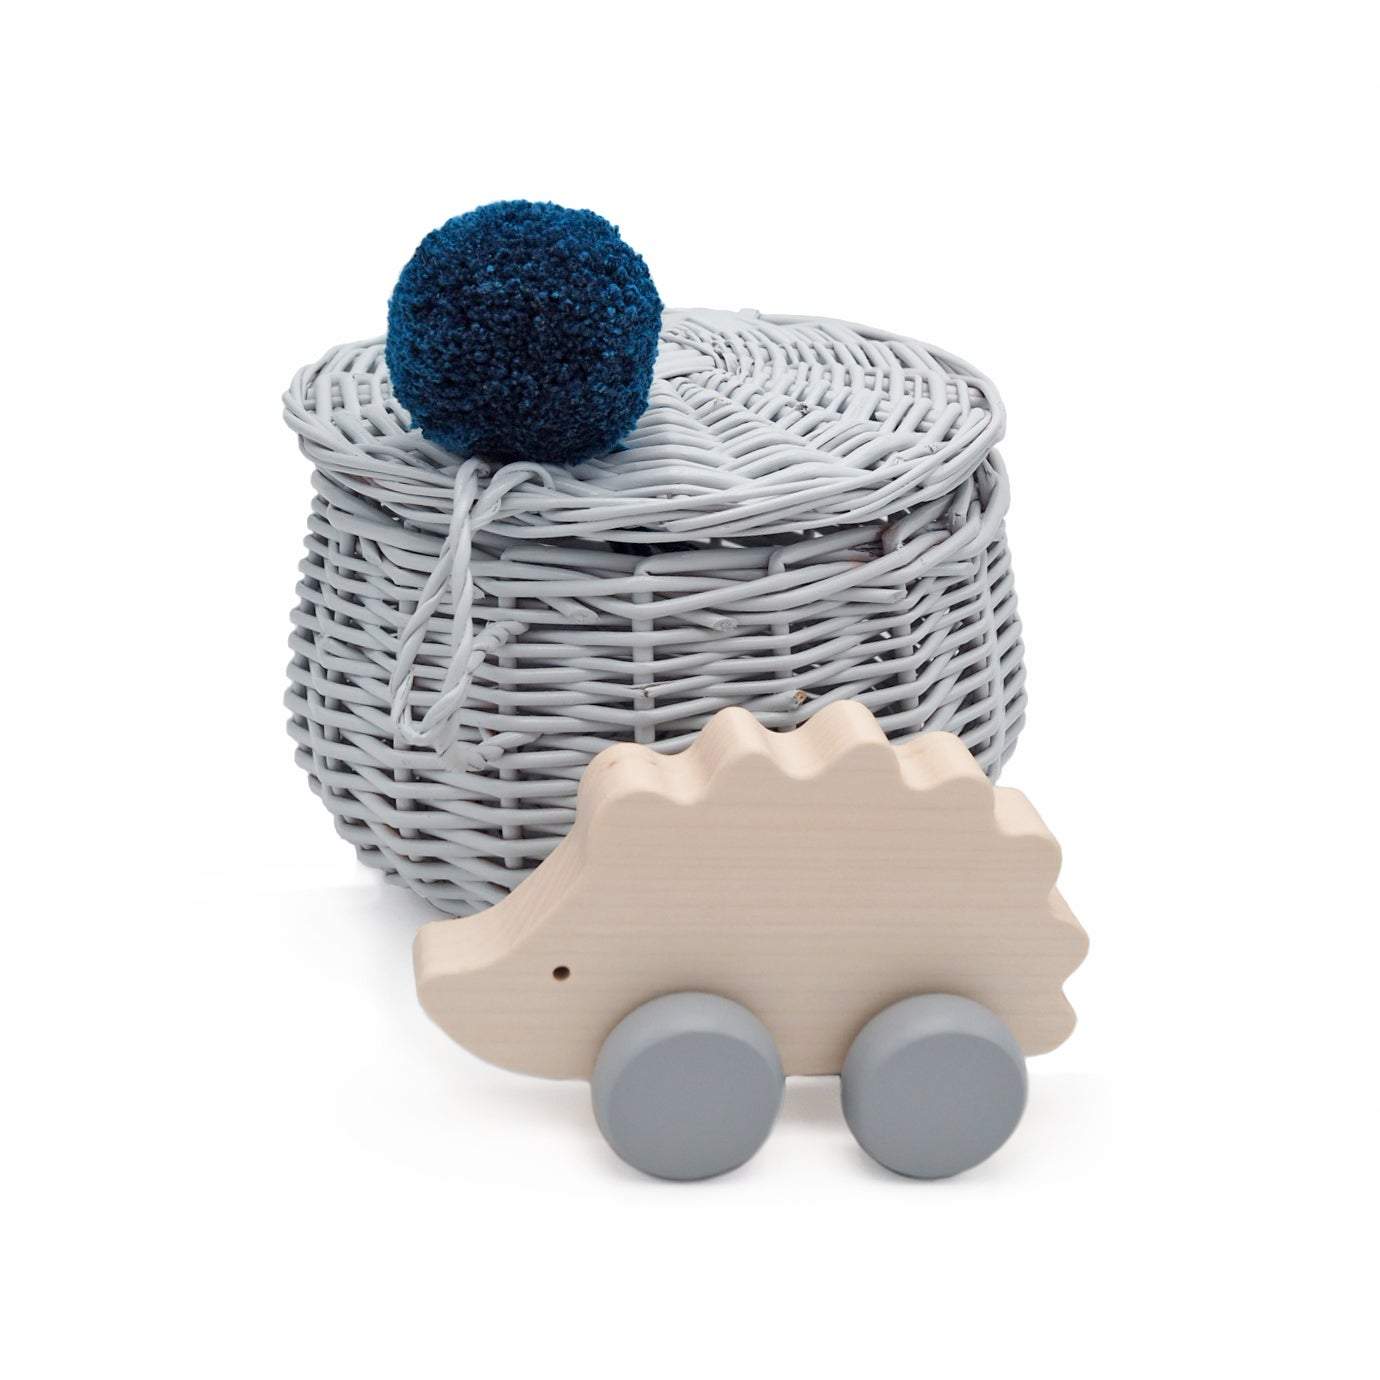 Hedgehog Push Toy - thetinycrate